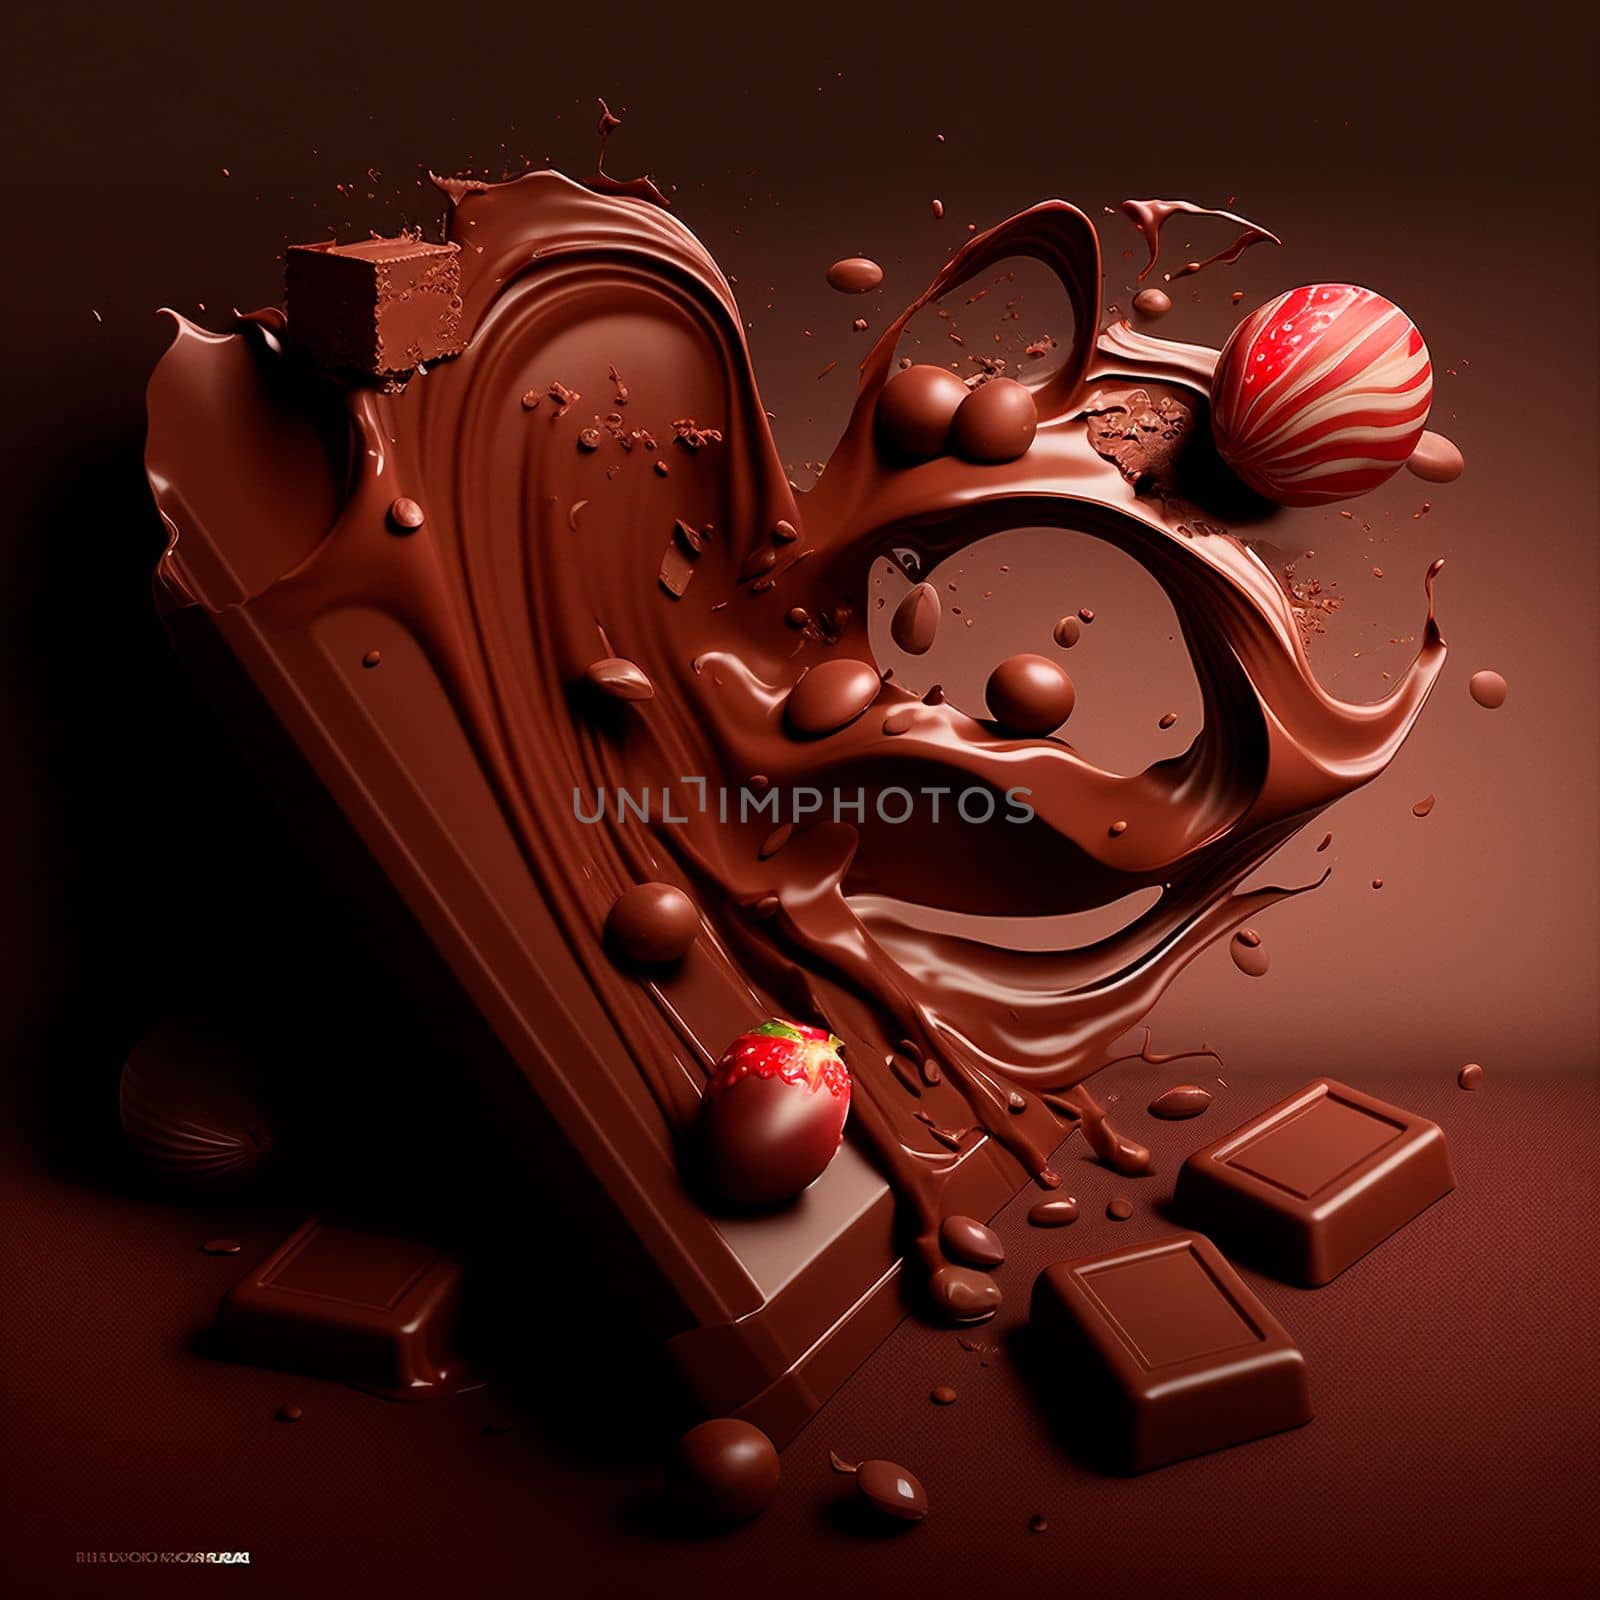 illustration of beautiful chocolate platter by NeuroSky